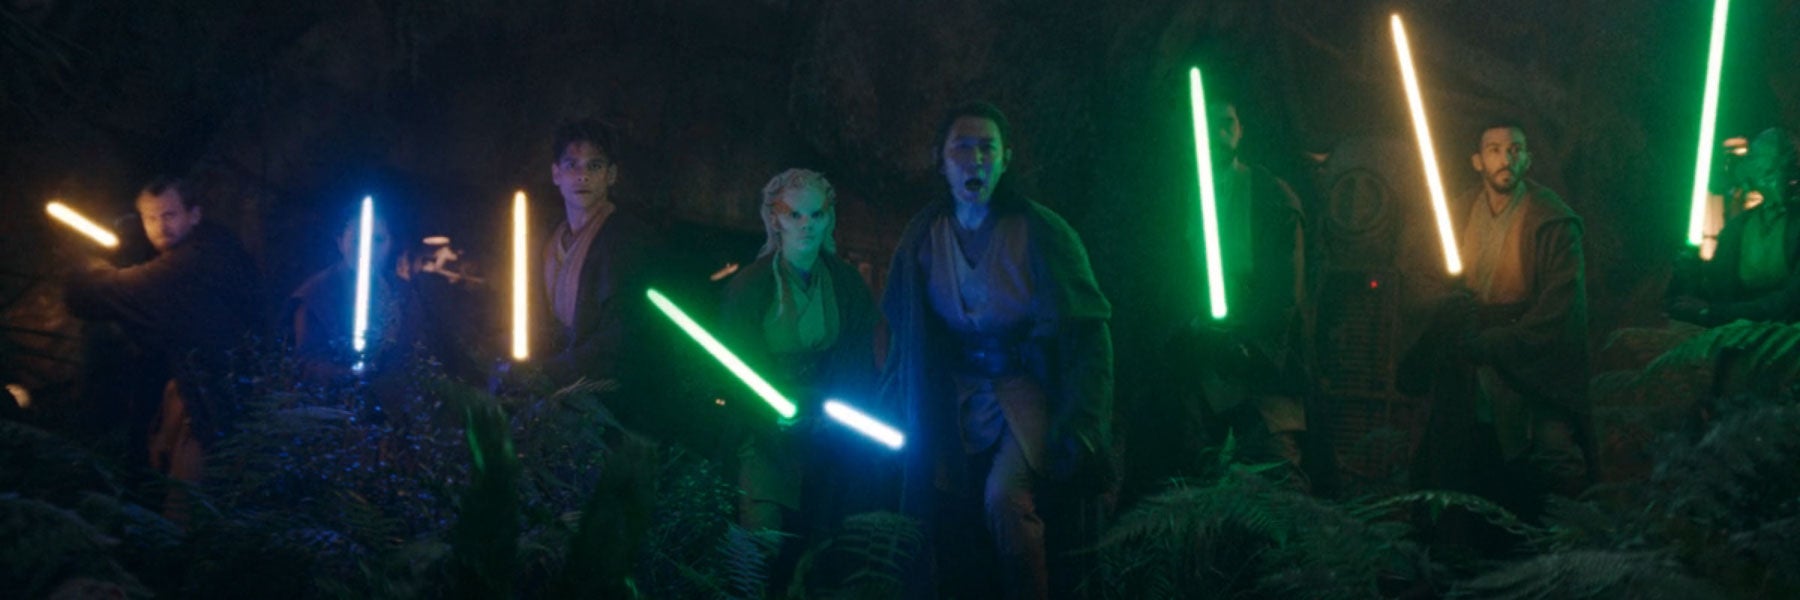 You Knew The Acolyte’s Jedi Were All Gonna Go Out Like Punks, and They Did - IGN Image